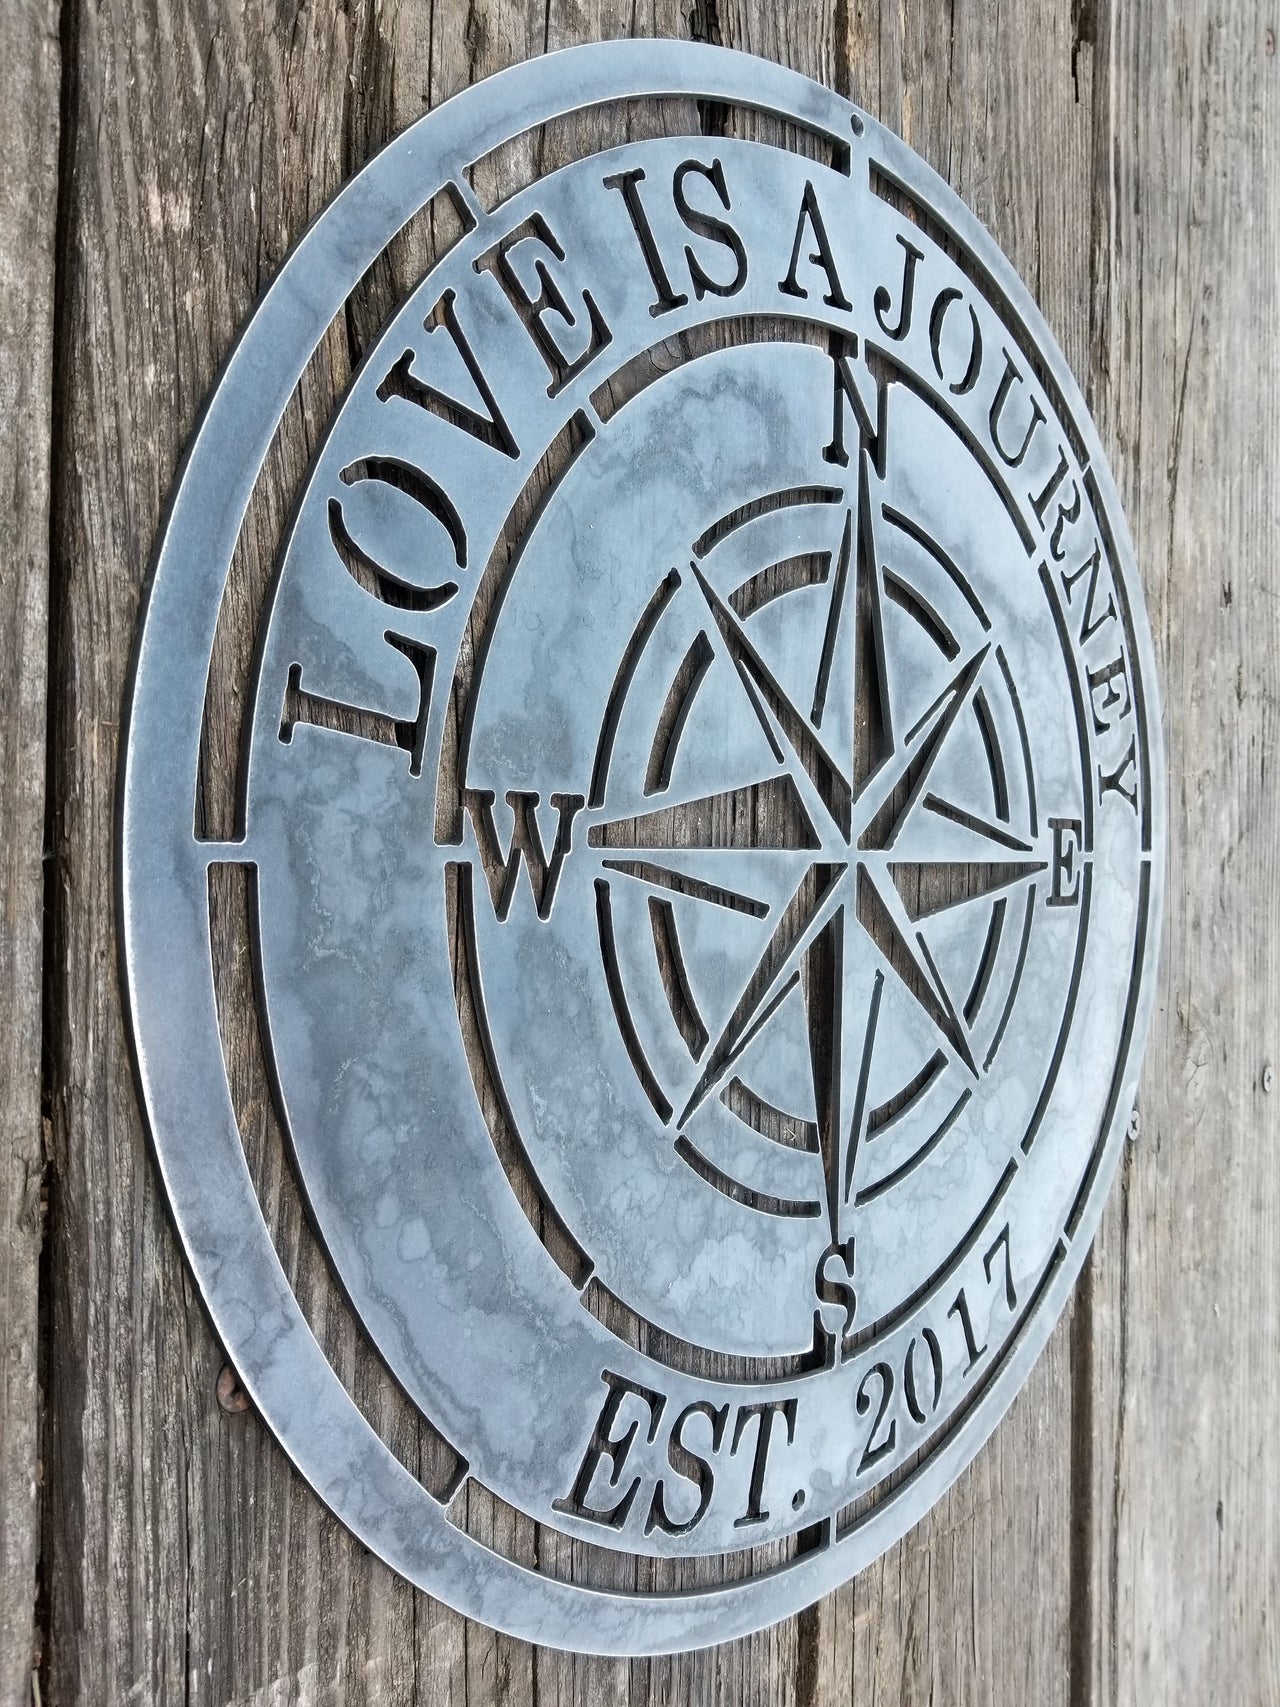 A nautical compass rose which reads, "Love is A Journey".